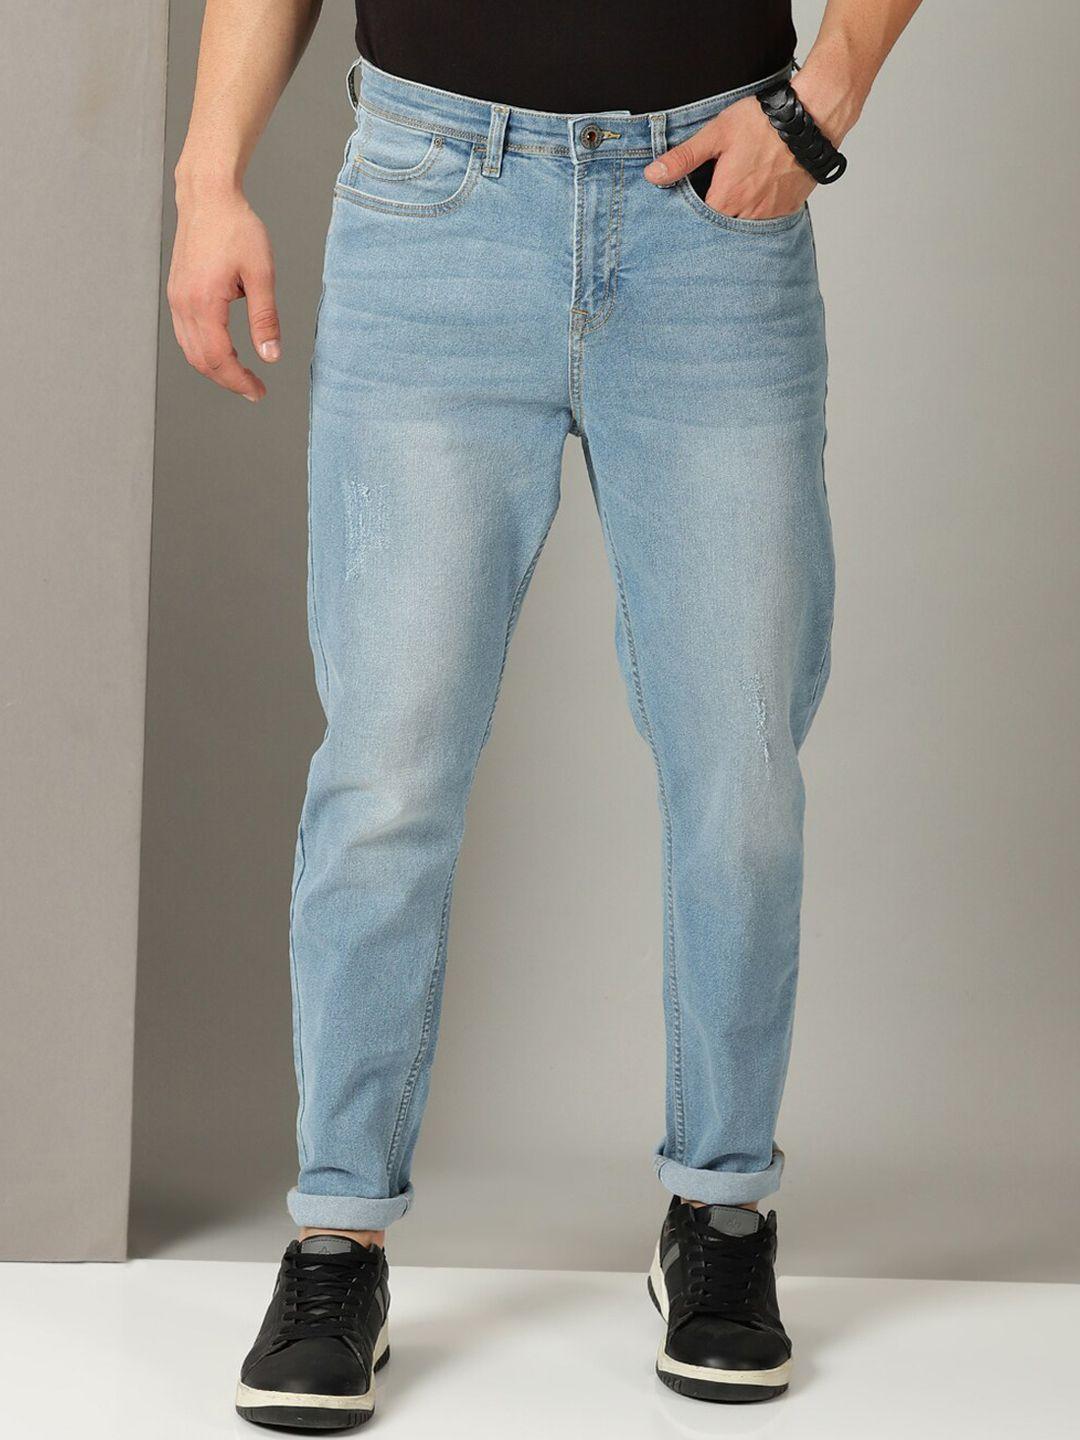 old-grey-men-relaxed-fit-mid-rise-light-fade-clean-look-cotton-jeans